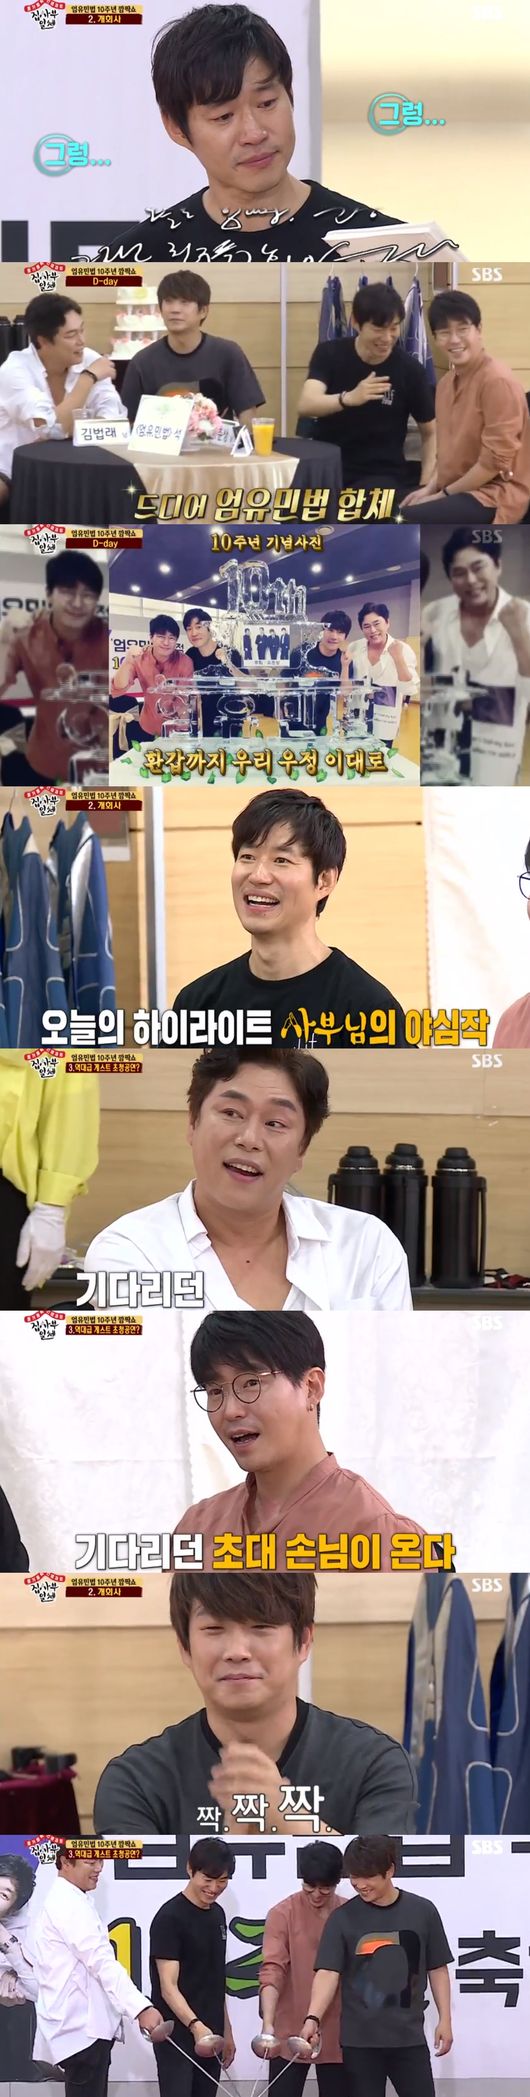 The All The Butlers rise and fall have faced off with the Um Yu-min Act.On SBS Good Sunday - All The Butlers on the 12th, Lee Sang-yoon, Lee Seung-gi, Yang Se-hyeong and Yook Sungjae finished the master Yoo Jun-sang and hard Haru.The members who did a lot of things in Haru with reversal class were tired.But the passion master was different: he finished Haru with calligraphy and ink painting he had learned from film shooting.All The Butlers members also wrote their own Haru feeling by grabbing food and holding a brush.Lee Seung-gi admired himself, saying, The ink painting genius was born.His work depicts Yoo Jun-sangs nickname, Showman, as mountains, rivers, trees, houses, and fields. Yoo Jun-sang and members also praised Lee Seung-gis self-praise and praised the sense.Lee Seung-gi, who was praised by everyone, said, This is the most joyful moment in All The Butlers appearance.I have to do it with a profile photo. Even if I boasted, I was recognized as this time.Lee Sang-yoon wrote, Haru, which was hard today, will also turn the stage, and I will truly go crazy.Yook Sungjae was praised for writing better than the master with a message that I want to eat Chimak written as a stream of consciousness along with a wonderful candle painting.Yang Se-hyeong painted a tree full of flowershelves and said, My master is too big to contain all the trees.Yoo Jun-sang was thrilled with the pictures and messages of four people, and the members also took pictures of the works and expressed their desire to possess them.The members of All The Butlers, who have been in contact for 200 days, have also created team slogans like the Um Yu-min Act, which has become a rising figure after four members.The members showed off their strong (?) fraternity, giving the meaning brothers who step on each other and rise.Finally, bedtime. The members started a game of 10 elephant noses and a tissue paper to pick a member to sleep with Yoo Jun-sang.The sleeping party can sleep at 3 am after two hours of script practice with Yoo Jun-sang, so the members have more teeth.Starting with Lee Sang-yoon, all of the members came to Game with too much seriousness; Yang Se-hyeong was the last-most likely but made a reset by catching a falling tissue.As a result, Yook Sungjae and Yang Se-hyeong won and Lee Seung-gi and Lee Sang-yoon, who threw tissue closer than Yoo Jun-sang, were penalized for sleeping.In fact, Yoo Jun-sang, Lee Seung-gi, and Lee Sang-yoon burned the dawn by practicing musical scripts until after 3 am.The passion master, Yoo Jun-sang, did not sleep and poured out his love for his work, and they prepared the tenth anniversary event of the Eom Yu-min law.The following day, the Um Yu-min law tenth anniversary commemorative event prepared by Yoo Jun-sang and All The Butlers members was held.Um Ki-joon, Yoo Jun-sang, Min Young-ki and Kim Beop-rae have been on the same musical stage for 10 years and have been enjoying a strong friendship.The eldest brother, Yoo Jun-sang, organized an event to celebrate this, and Kim Beop-rae, Min Young-ki and Um Ki-joon laughed broadly, even taking group photos in front of ice sculptures.Kim Beop-rae praised Yoo Jun-sang for as always, I tried a lot seriously.But there was a twist: Um Ki-joon revealed: Its not tenth anniversary, its our nine-year car, my brother did the wrong calculations.All The Butlers members pinpointed, Is everything about Master Yoo Jun-sangs mistake? Its a tenth anniversary memorial show forcibly.However, Yoo Jun-sang was amused by even flowering and flowering; in his opening remarks, he said, It was the first day of the Three Musketeers performance on May 12, 2009, 10 years.I am grateful that I was able to spend those times on stage. It was meaningful and beautiful because I was with good friends. It was beautiful and young. The masters ambitious performance was a celebration.Kim Beop-rae, Um Ki-joon, Min Young-ki wanted a girl group such as Black Pink and Suzie, but Yoo Jun-sang prepared the We Are One celebration performance of the main characters of the law.The four completed a wonderful harmony with fantastic breathing.The main event was a decibel measurement game: All The Butlers members shouted up, up and up, up and up and they were 84 decibels.The members of the Umyu Civil Law were confident of the tenth anniversary friendship, but they shot 84 decibels equally.The final game was a game: all of the teas that were 10 times more than the sorghum tea were drunk quickly with straws.On the other hand, Jin Sang-hyungs team proved a thin (?) friendship by driving the remaining Sotae tea to his youngest.Next year is the real tenth anniversary - please dont call me, said Um Ki-joon, who was scolded throughout the event.Lee Sang-yoon also said, Lets build up friendship for a long time like the Um Yoo-min law.All The Butlers